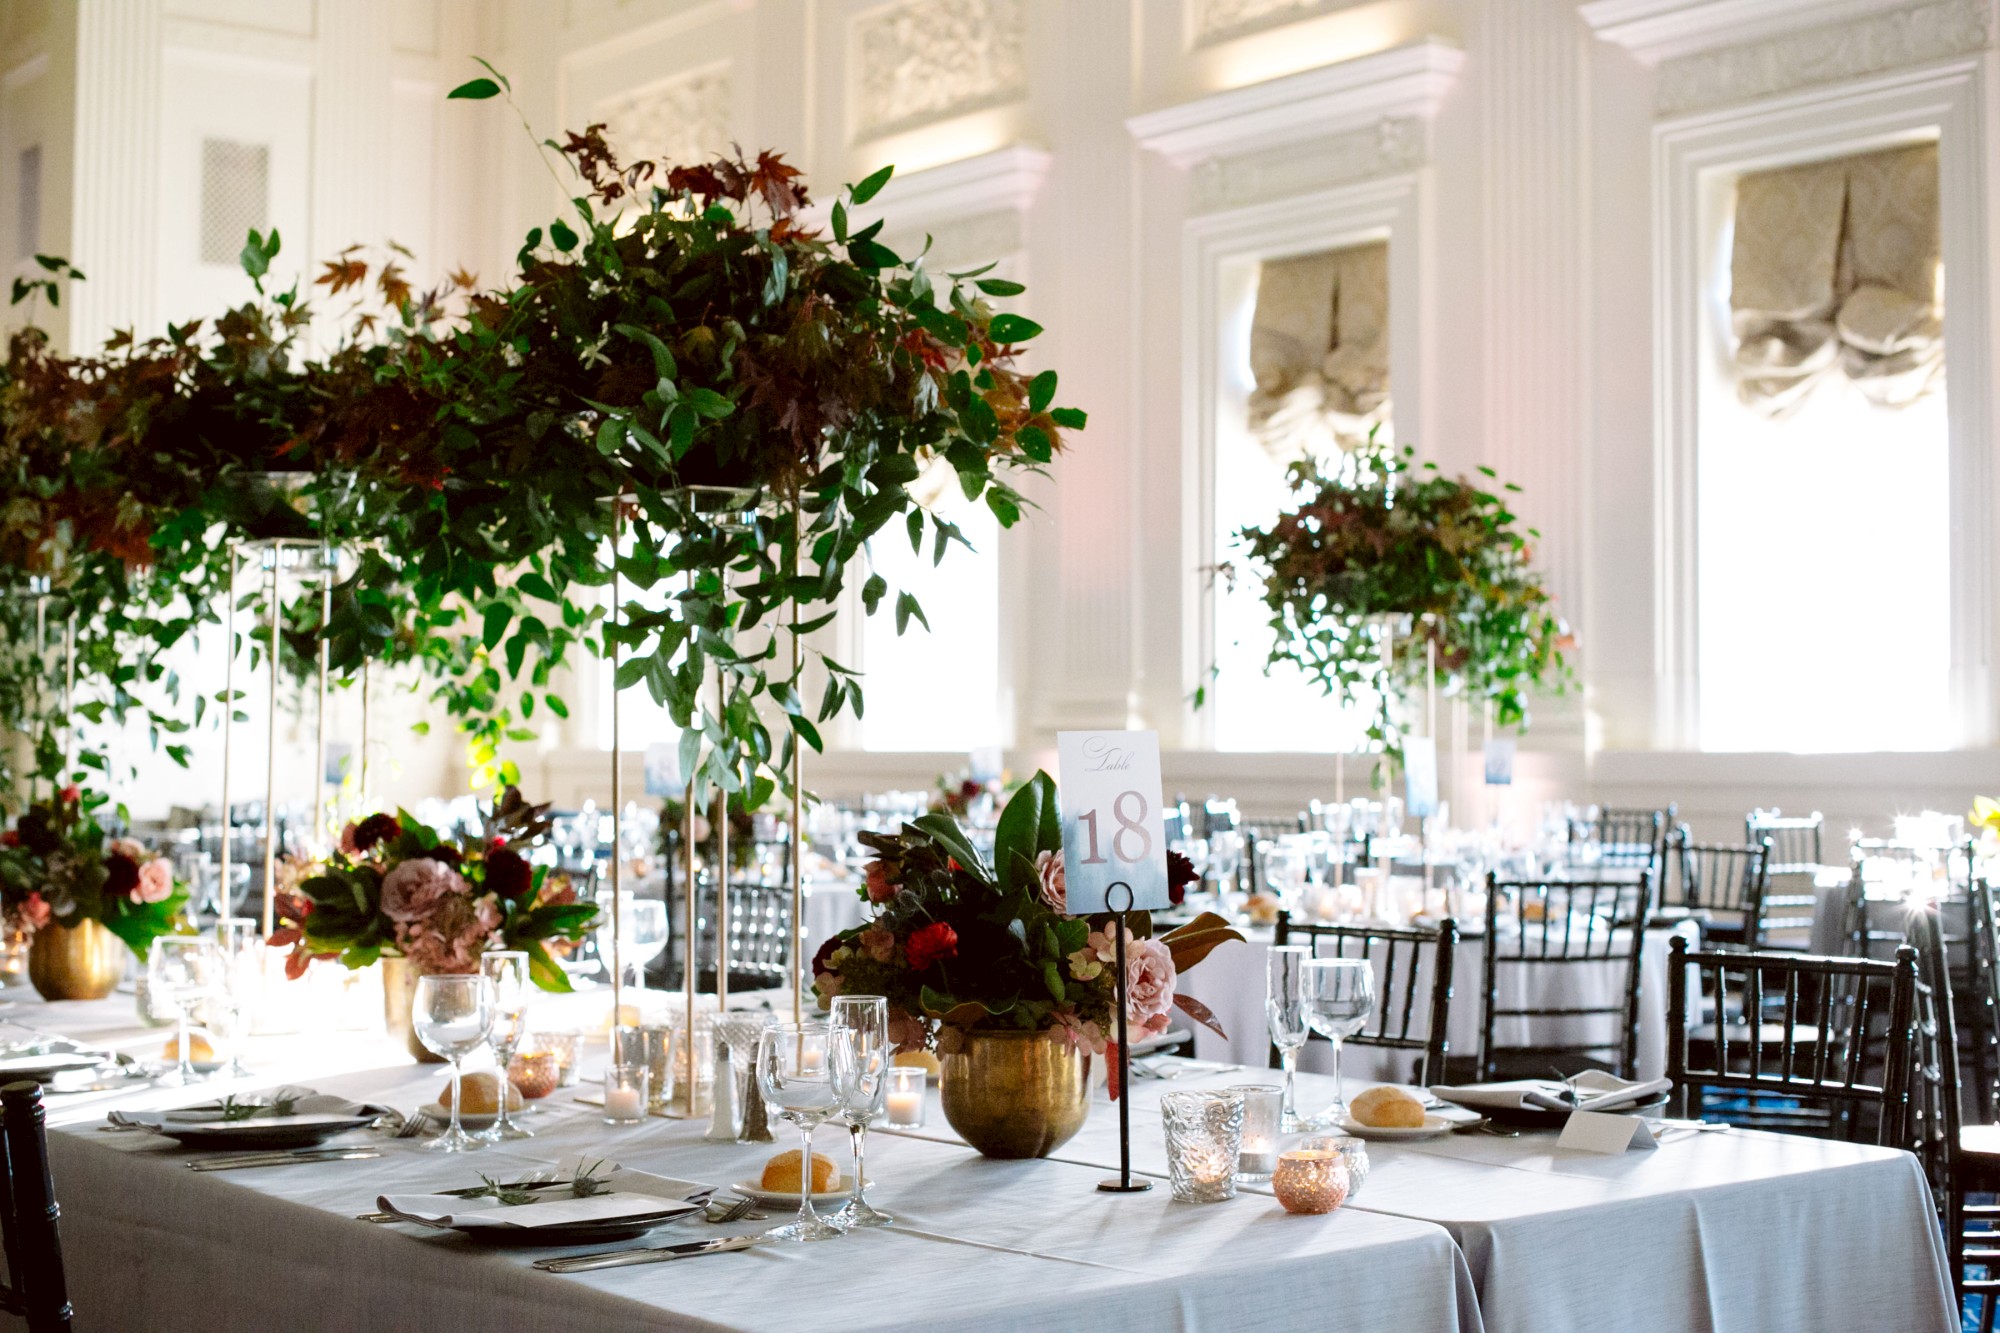 A beautifully decorated banquet hall with elegantly set tables, lush floral centerpieces, and tall windows allowing natural light to pour in.